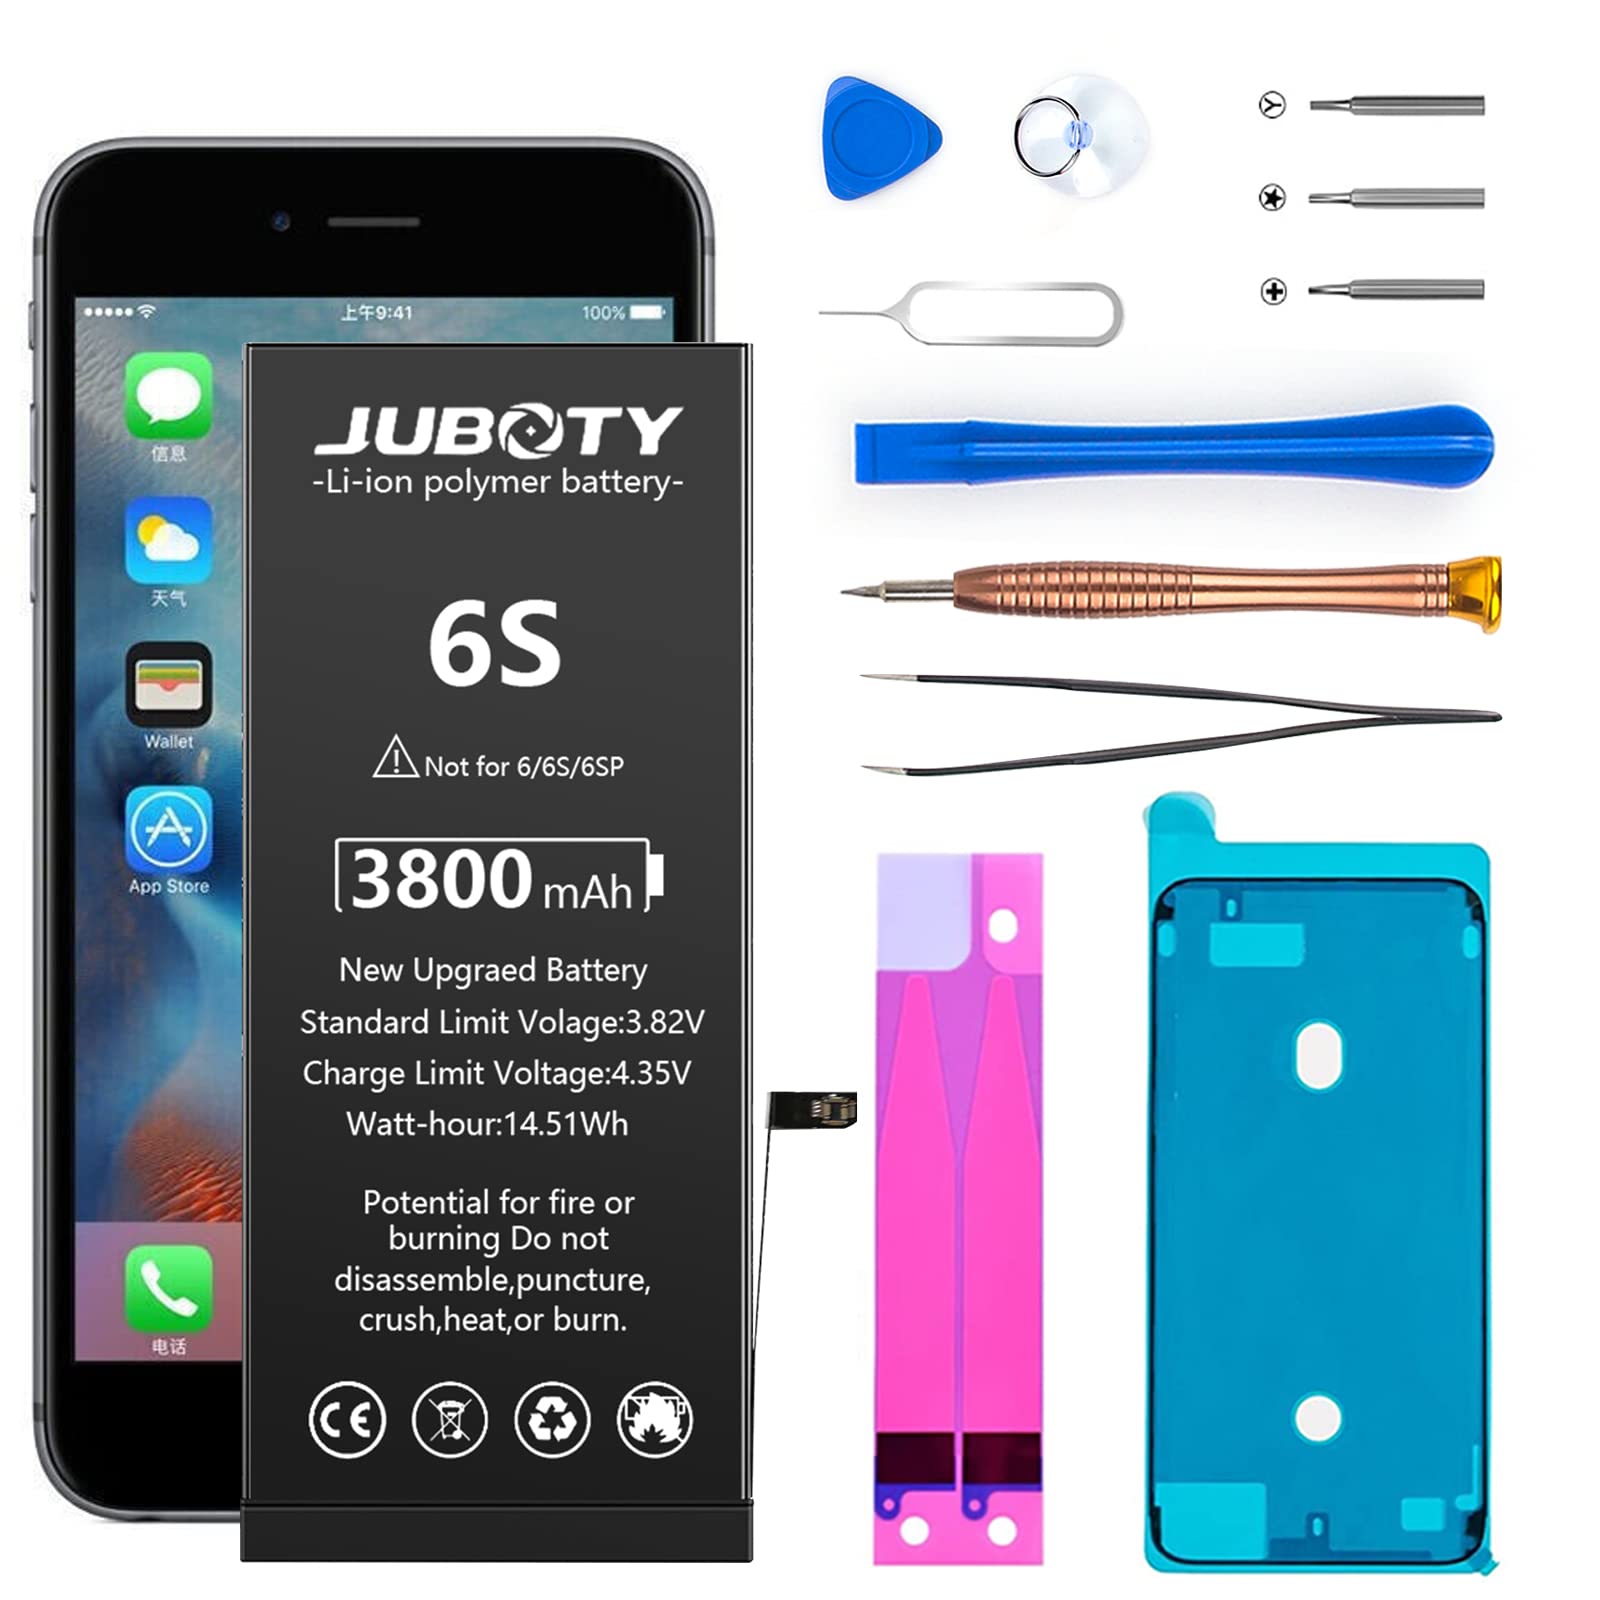 JUBOTY Battery for iPhone 6s 3800mAh, Li-ion New 0 Cycle Internal New Upgrade High Capacity Battery Replacement for iPhone 6S Model A1633 A1688 A1700 with Professional Repair Tool Kit